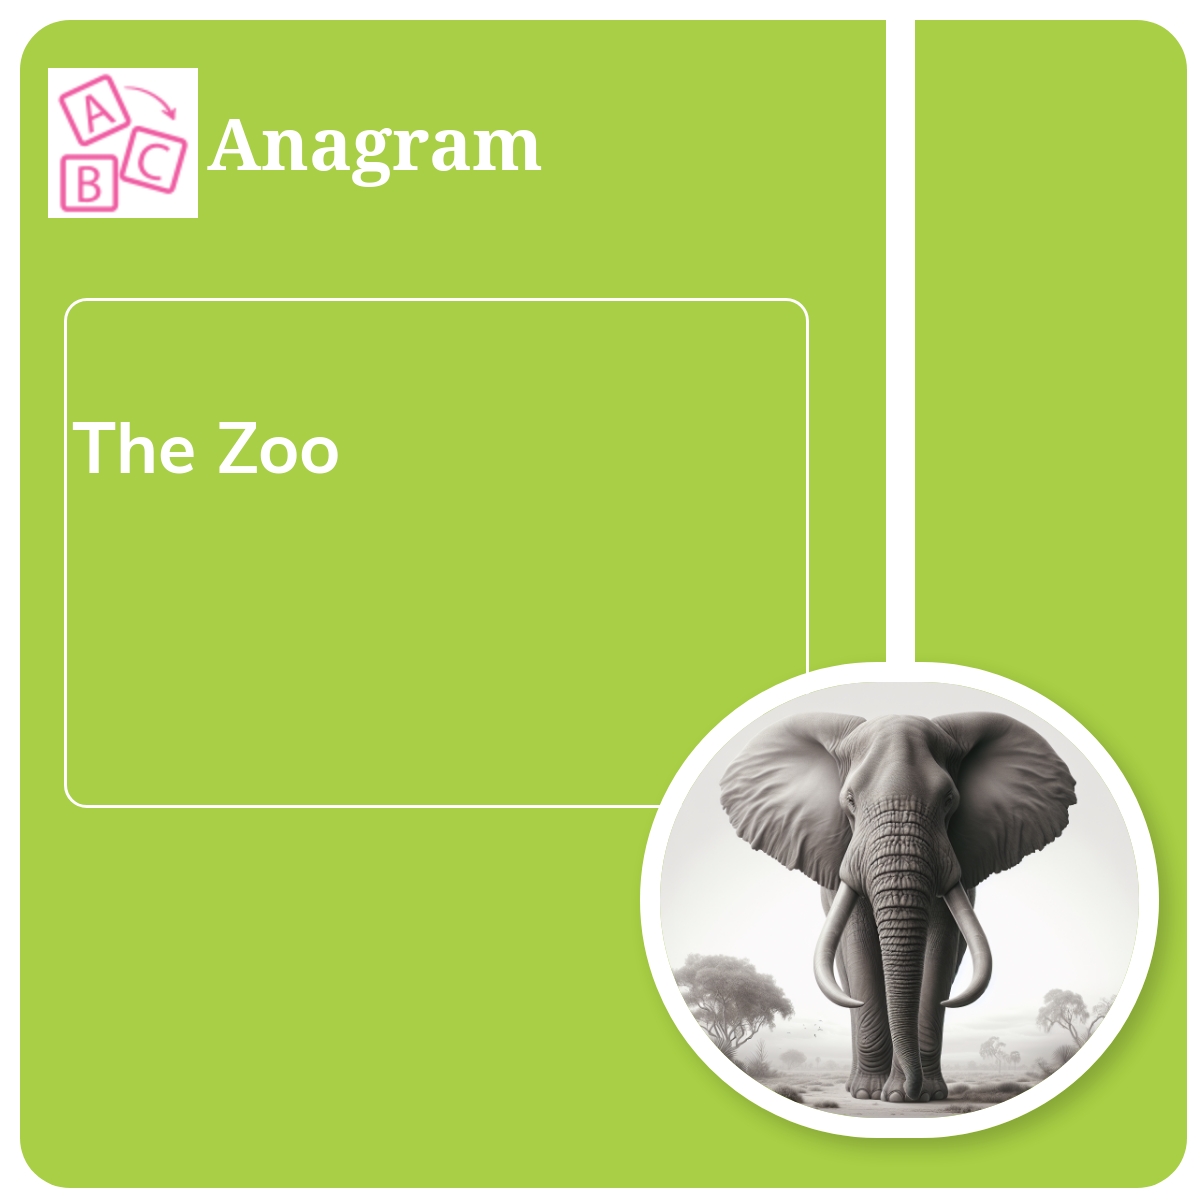 Simple Anagram: The Zoo